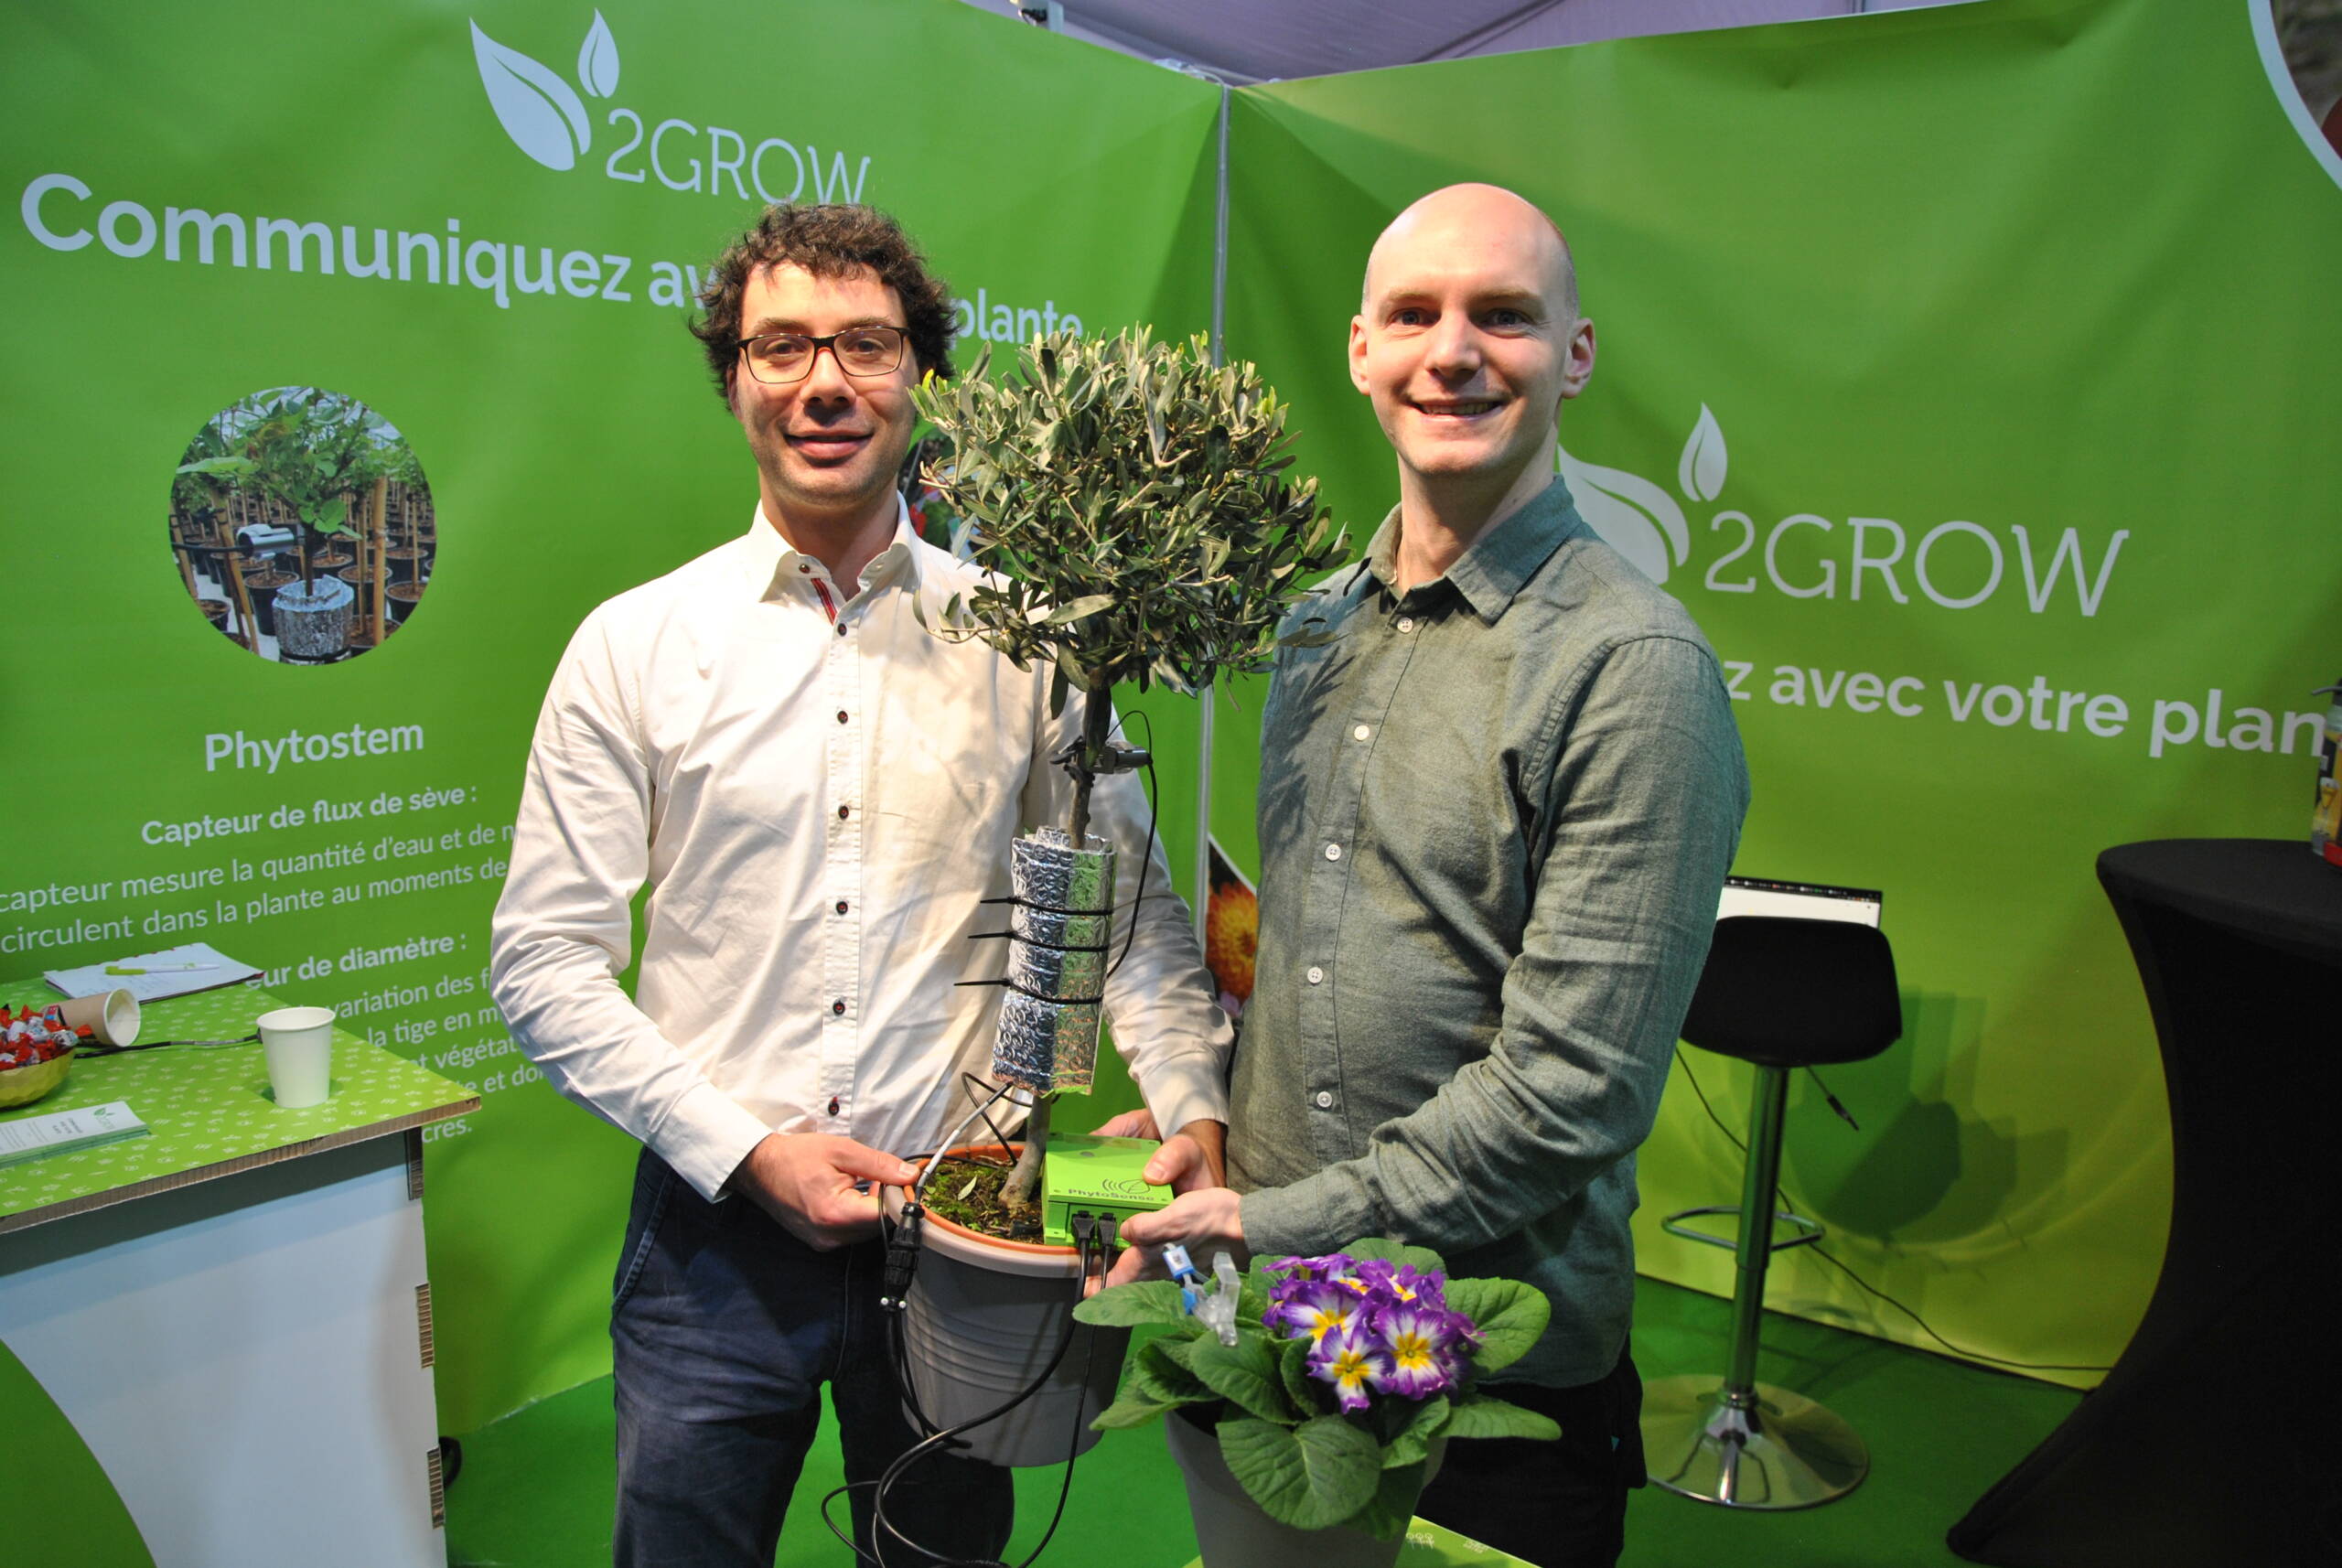 Standing right: Maxime Dedecker, manager at 2growearth.